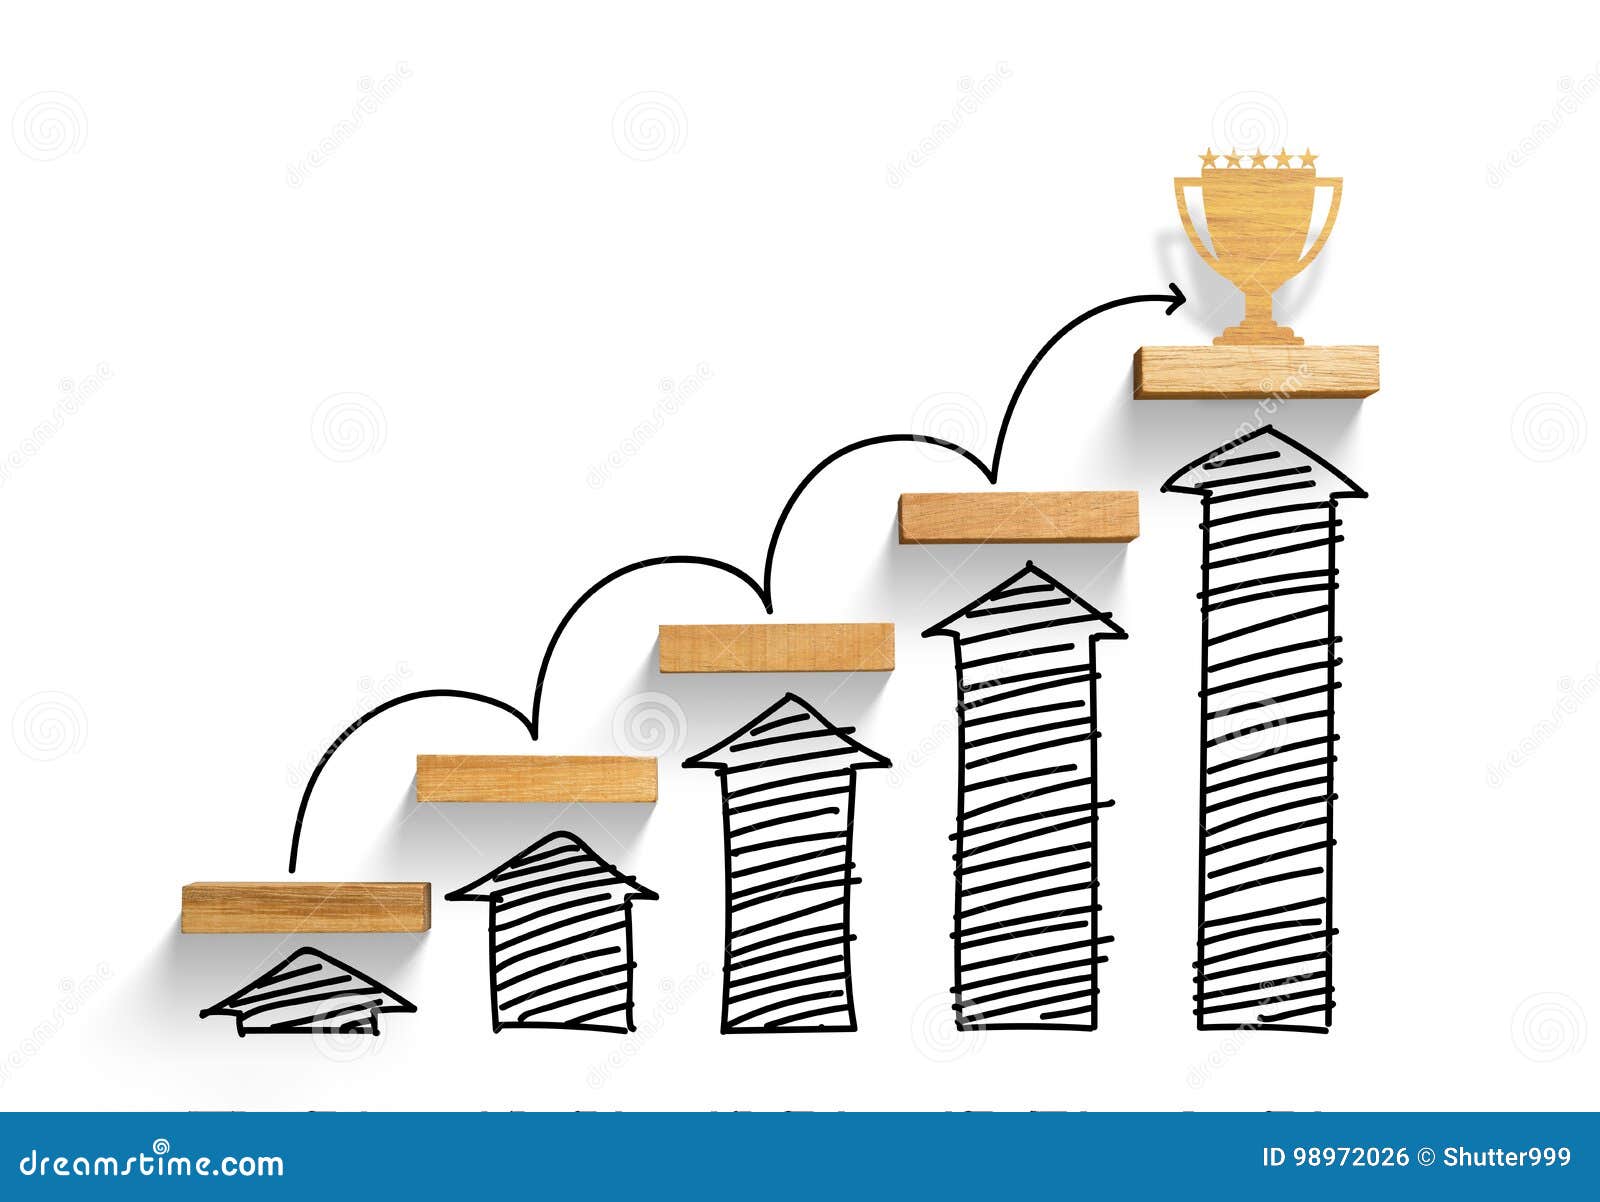 wooden staircase to reach goal and win trophy with increase graph and arrow